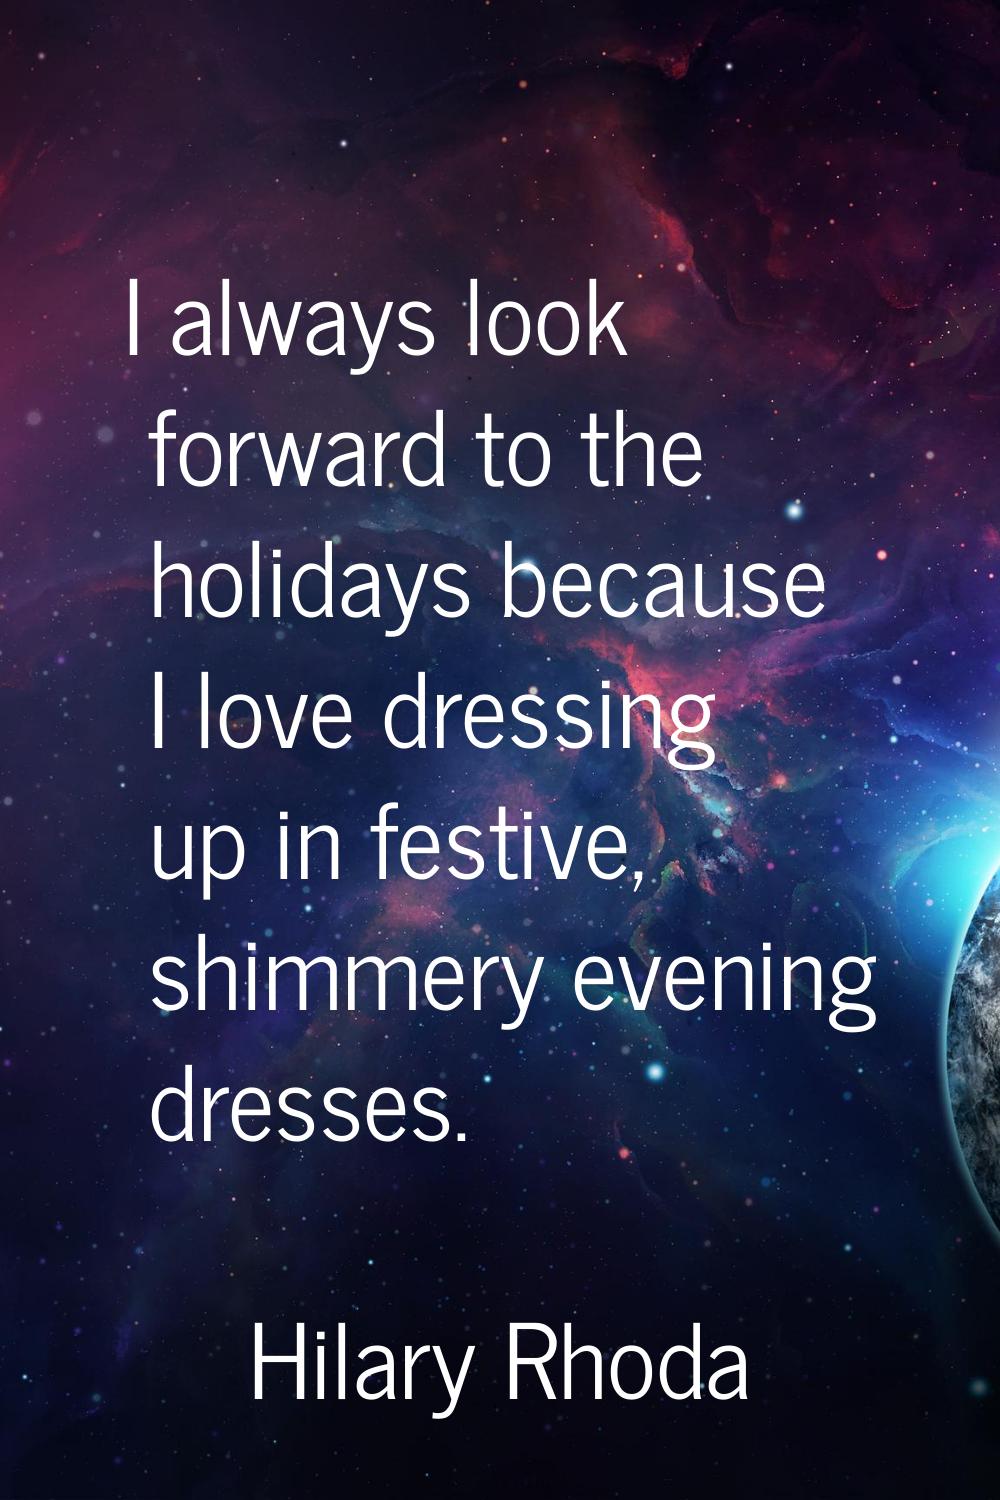 I always look forward to the holidays because I love dressing up in festive, shimmery evening dress